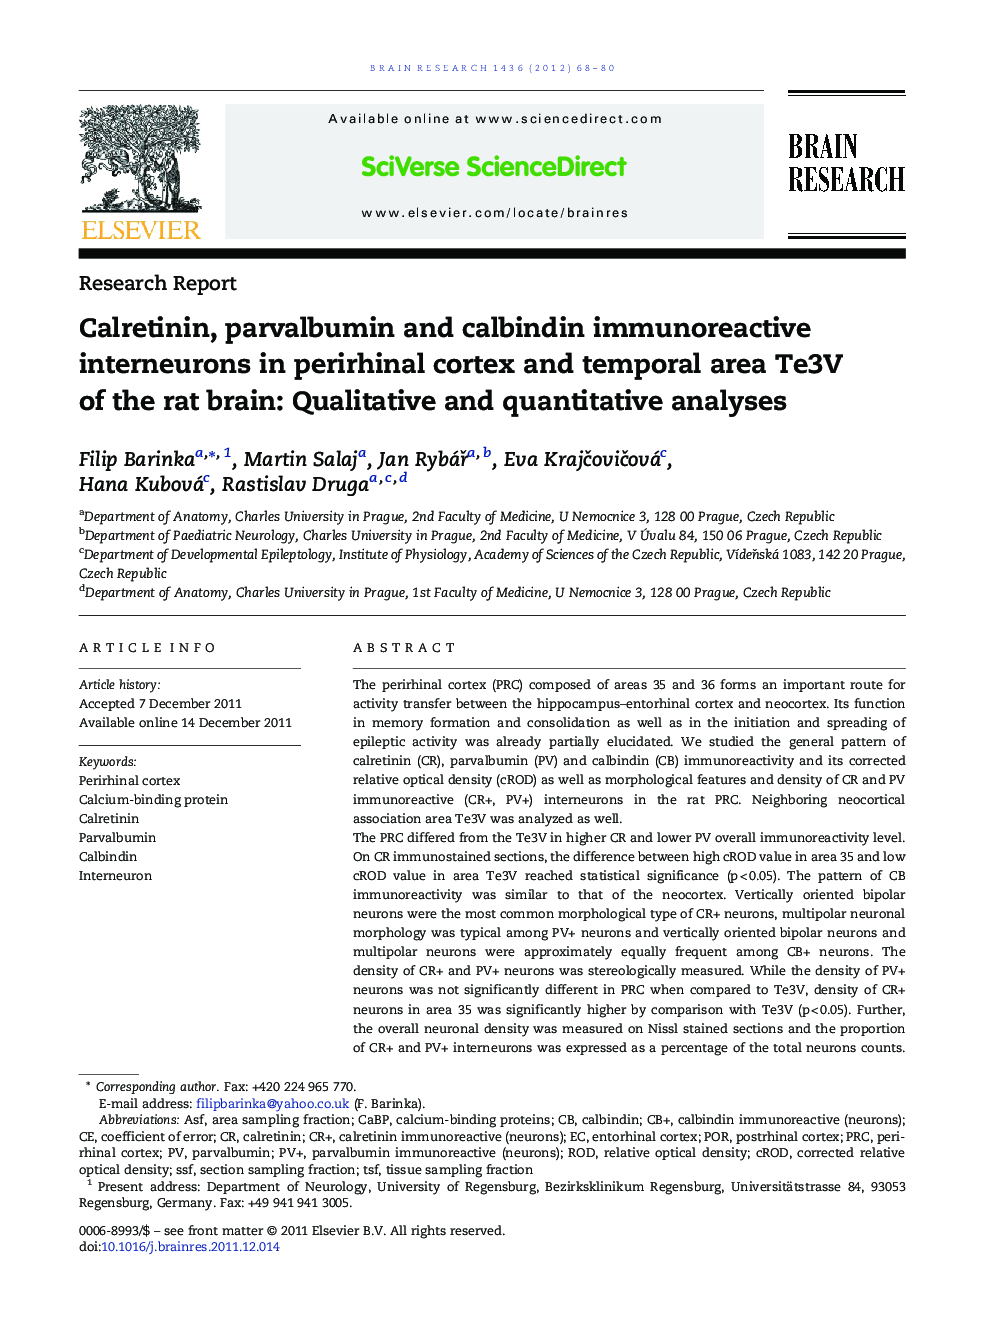 Research ReportCalretinin, parvalbumin and calbindin immunoreactive interneurons in perirhinal cortex and temporal area Te3V of the rat brain: Qualitative and quantitative analyses